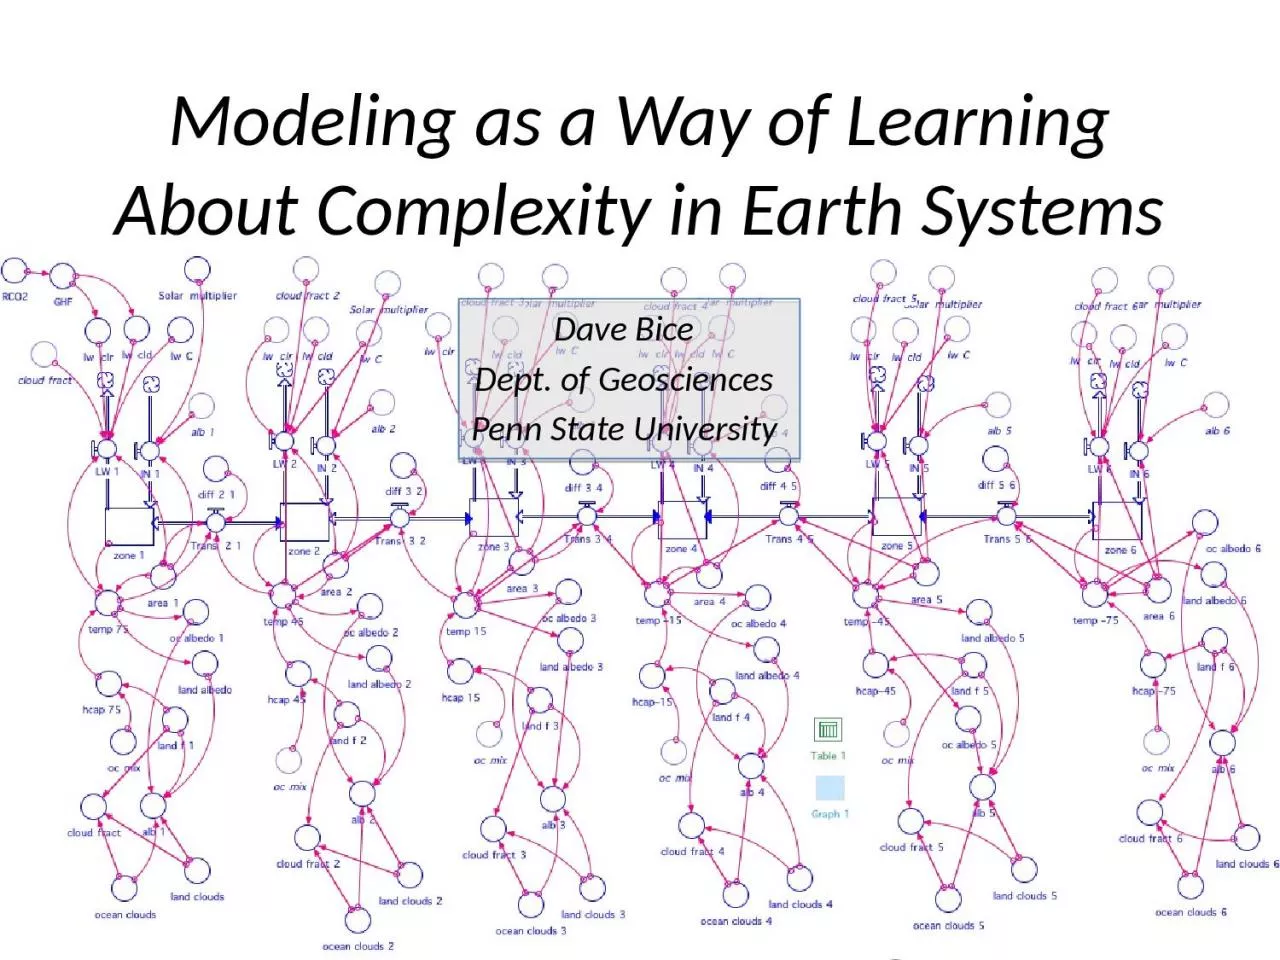 Modeling as a Way of Learning About Complexity in Earth Systems